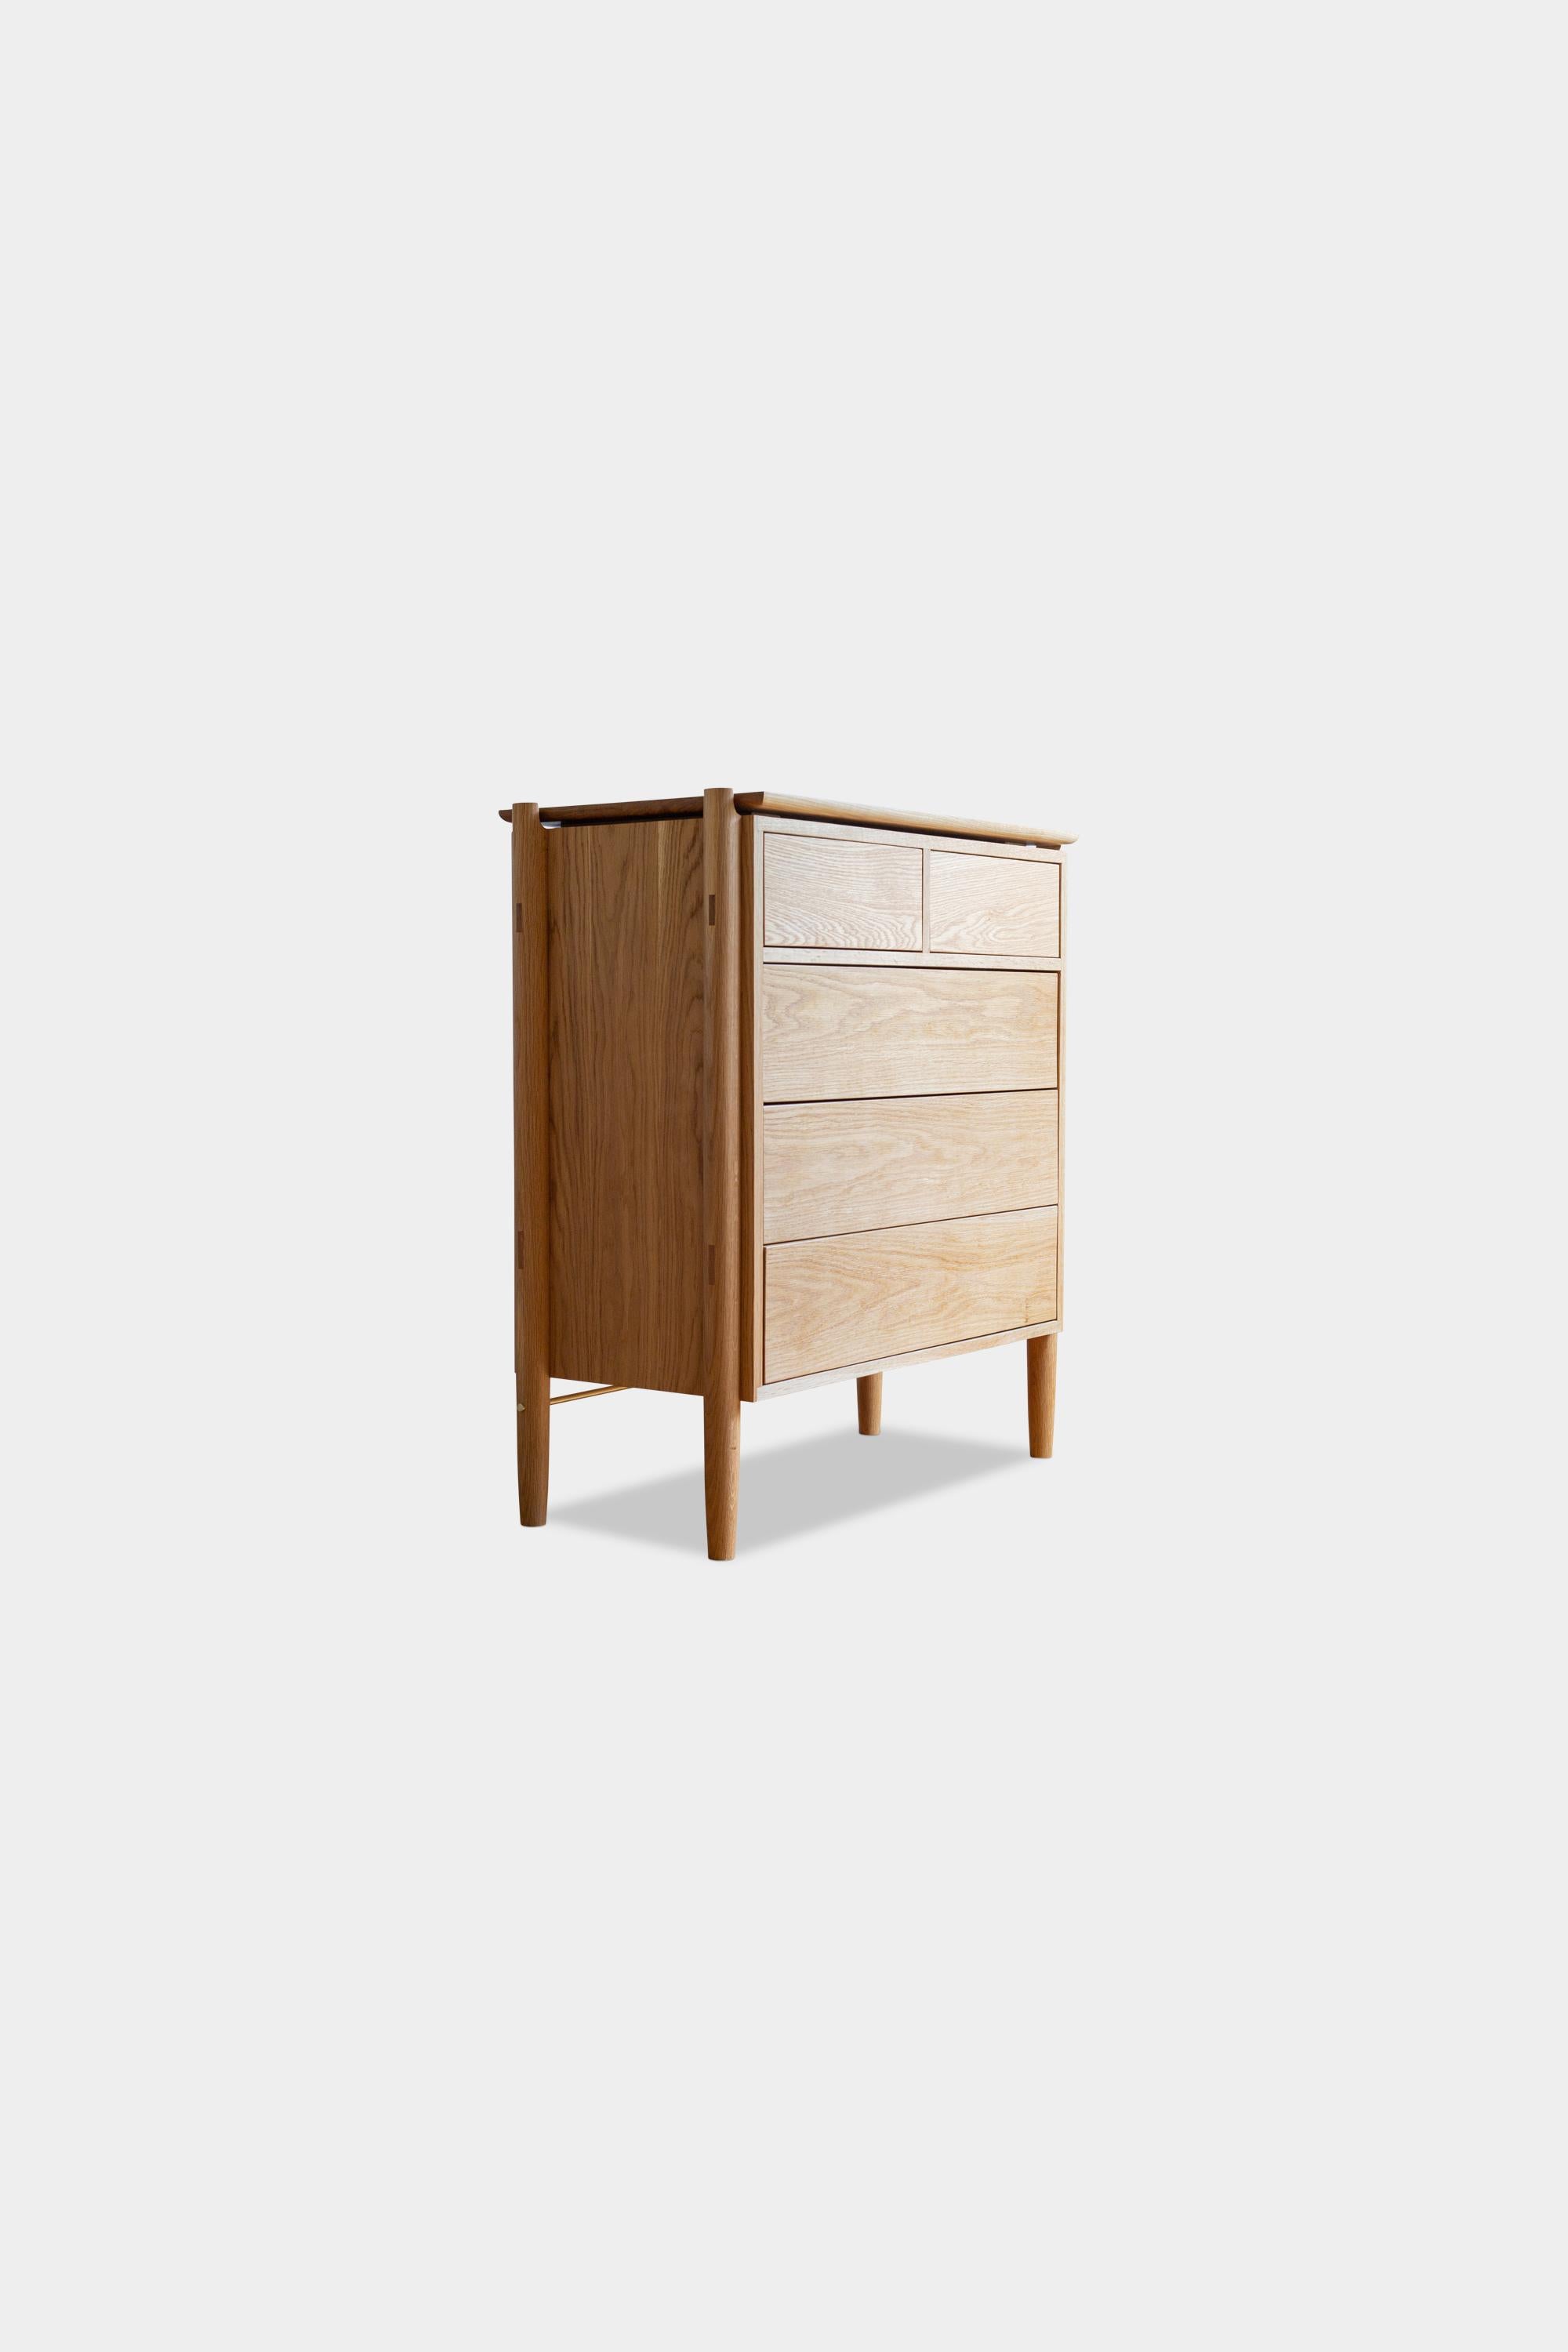 Solid wood constructed sideboard cabinet featuring hand-turned legs, hand-cut joinery and adjustable shelves. It details 5 push-to-open, soft-close drawers. There are custom configurations available, including hand loomed cane cabinet doors, solid